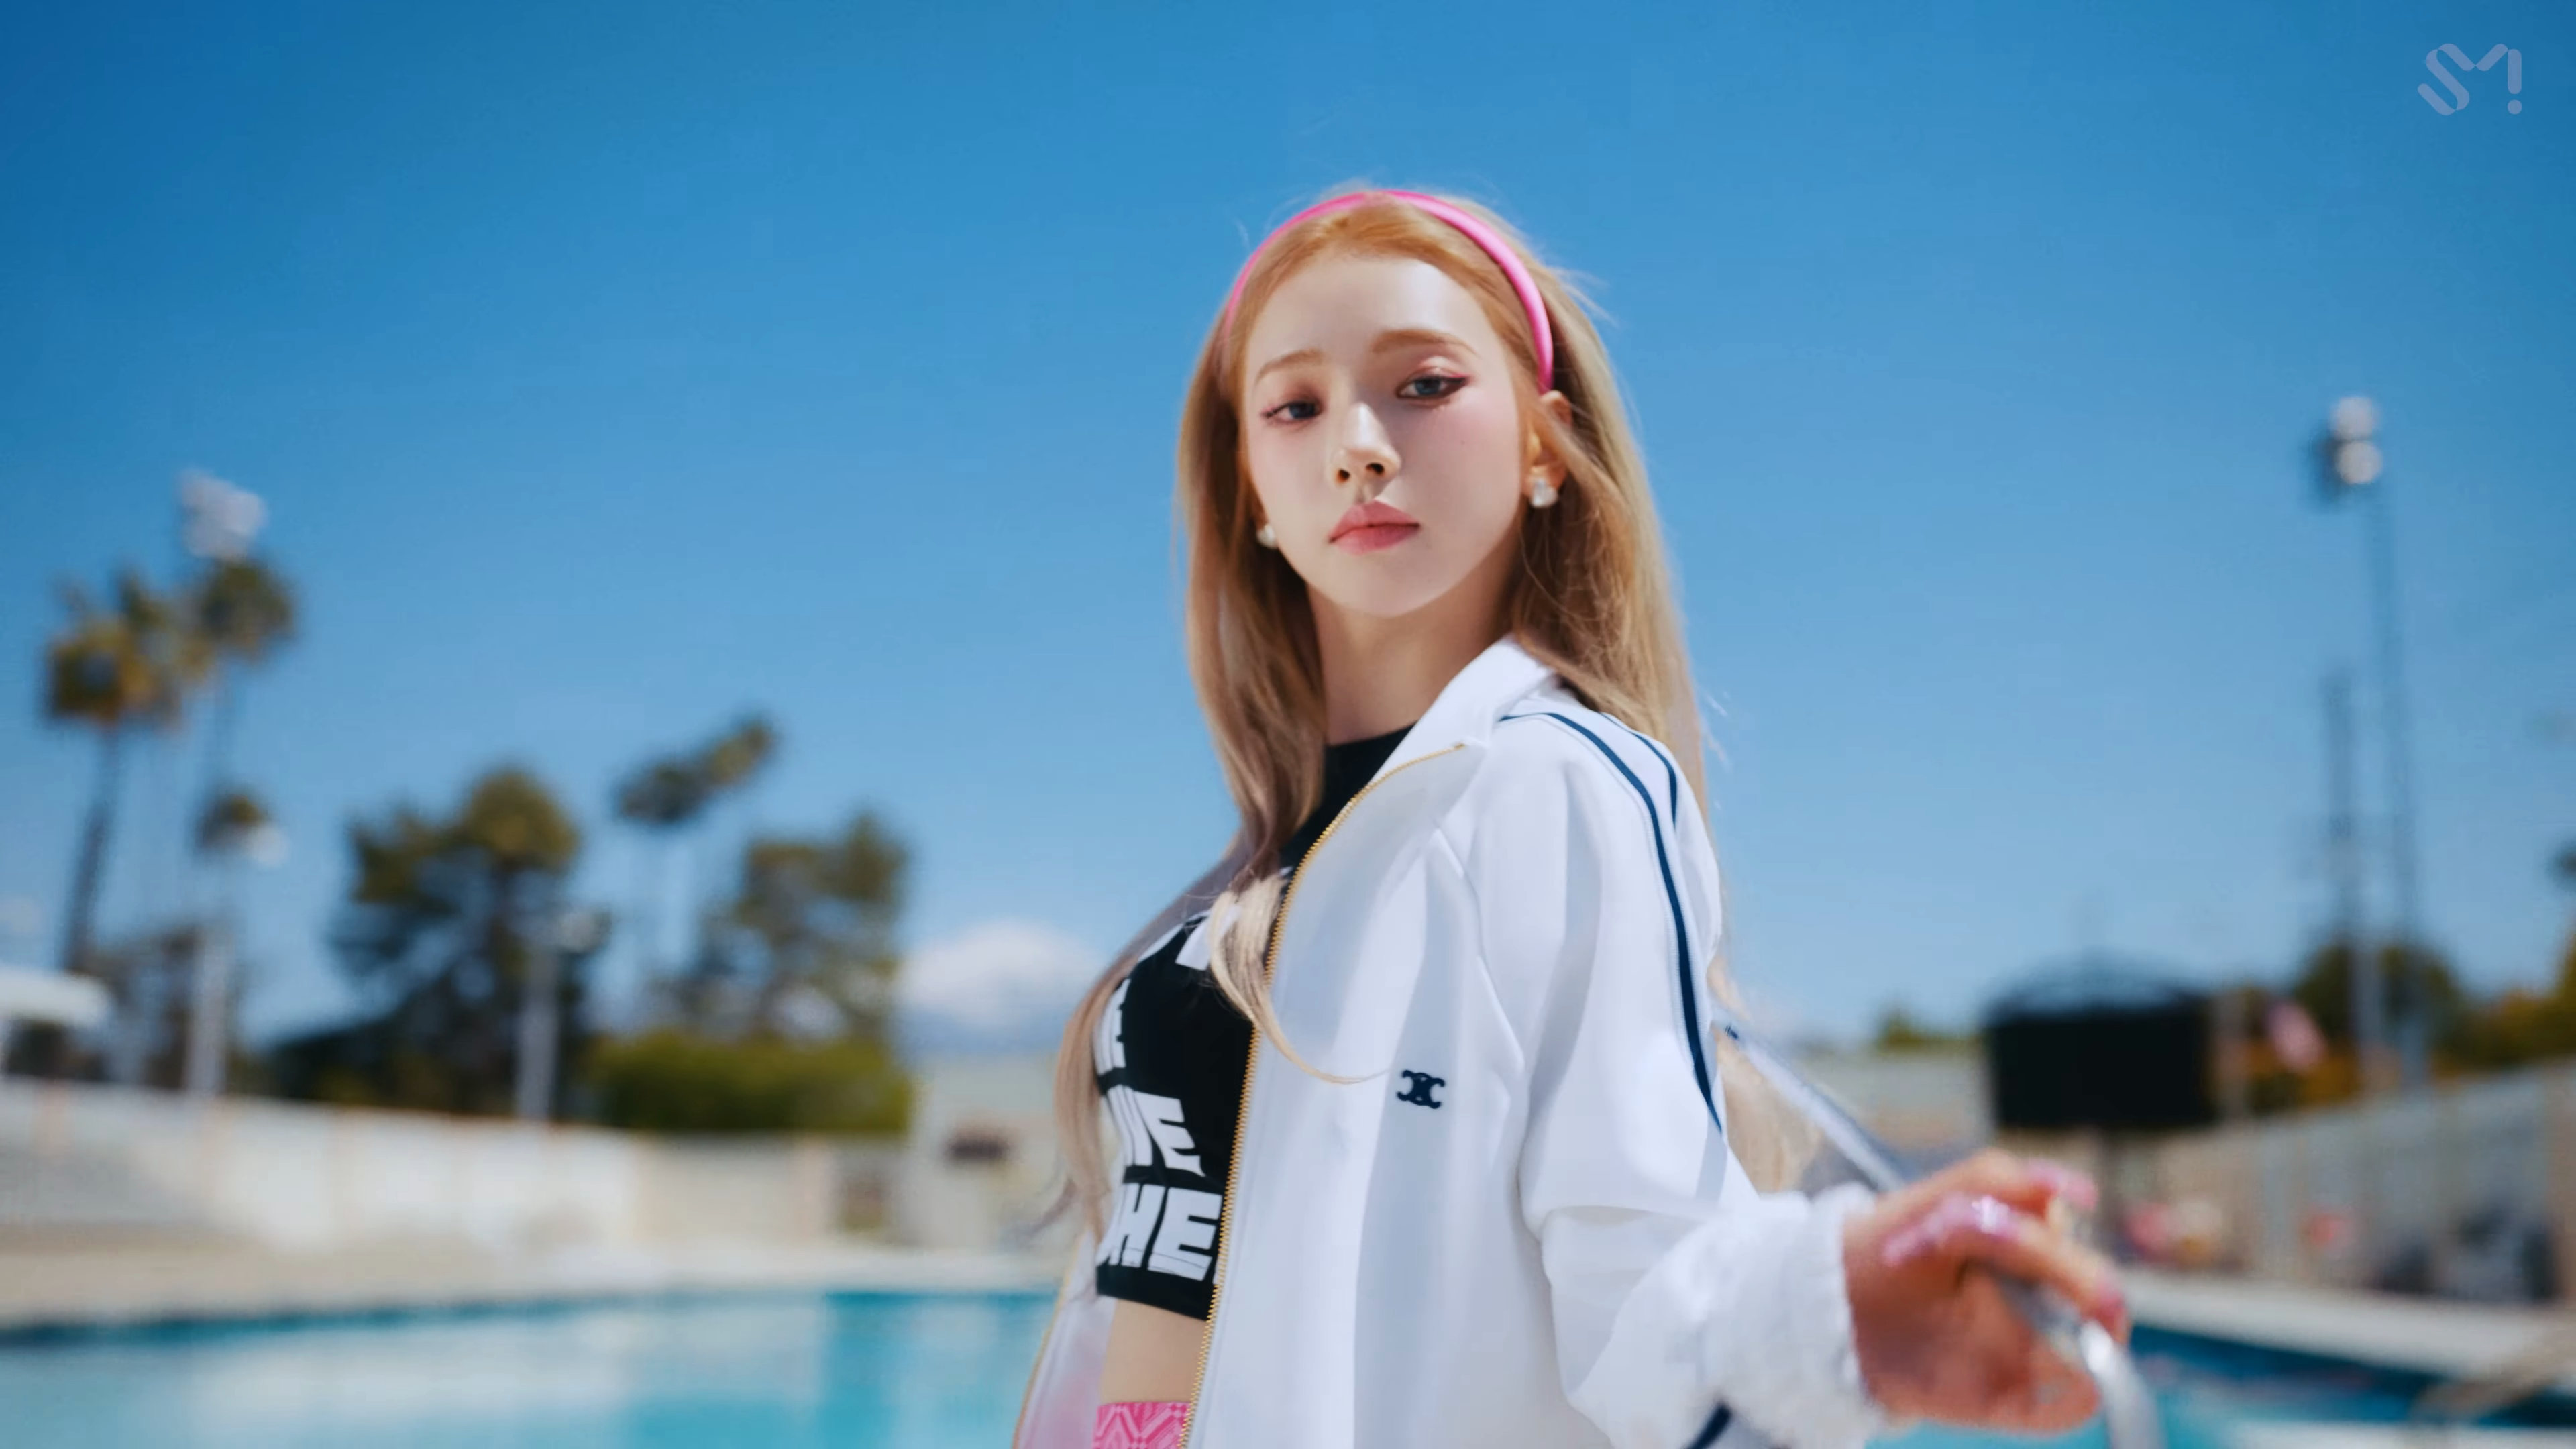 aespa Perfectly Encapsulate Y2K Energy with New MV "Spicy" | K-Pop Culture